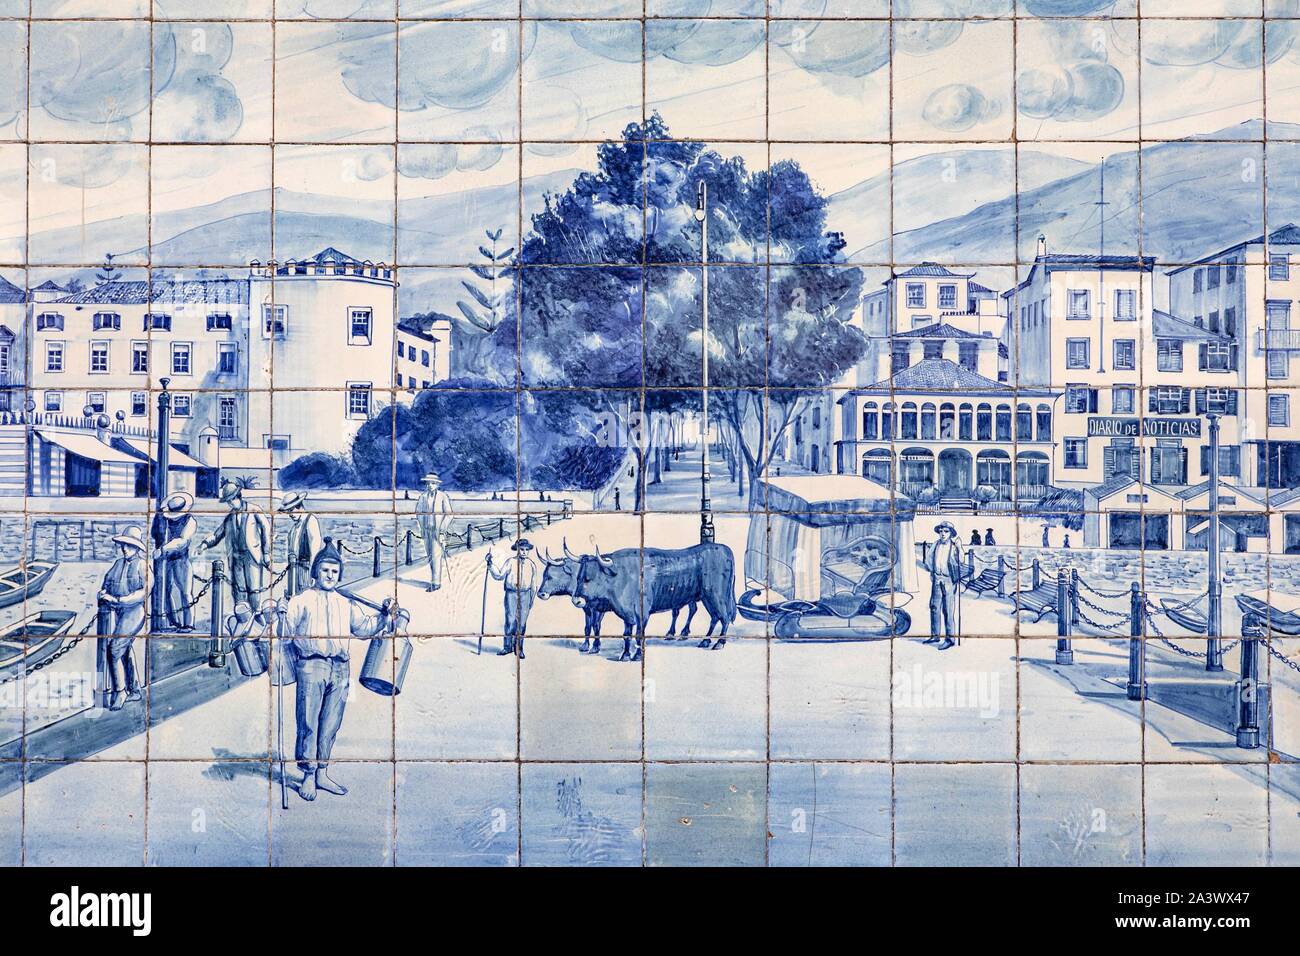 AZULEJOS, ILLUSTRATION OF THE CITY IN THE PAST, FUNCHAL, ISLAND OF MADEIRA, PORTUGAL Stock Photo